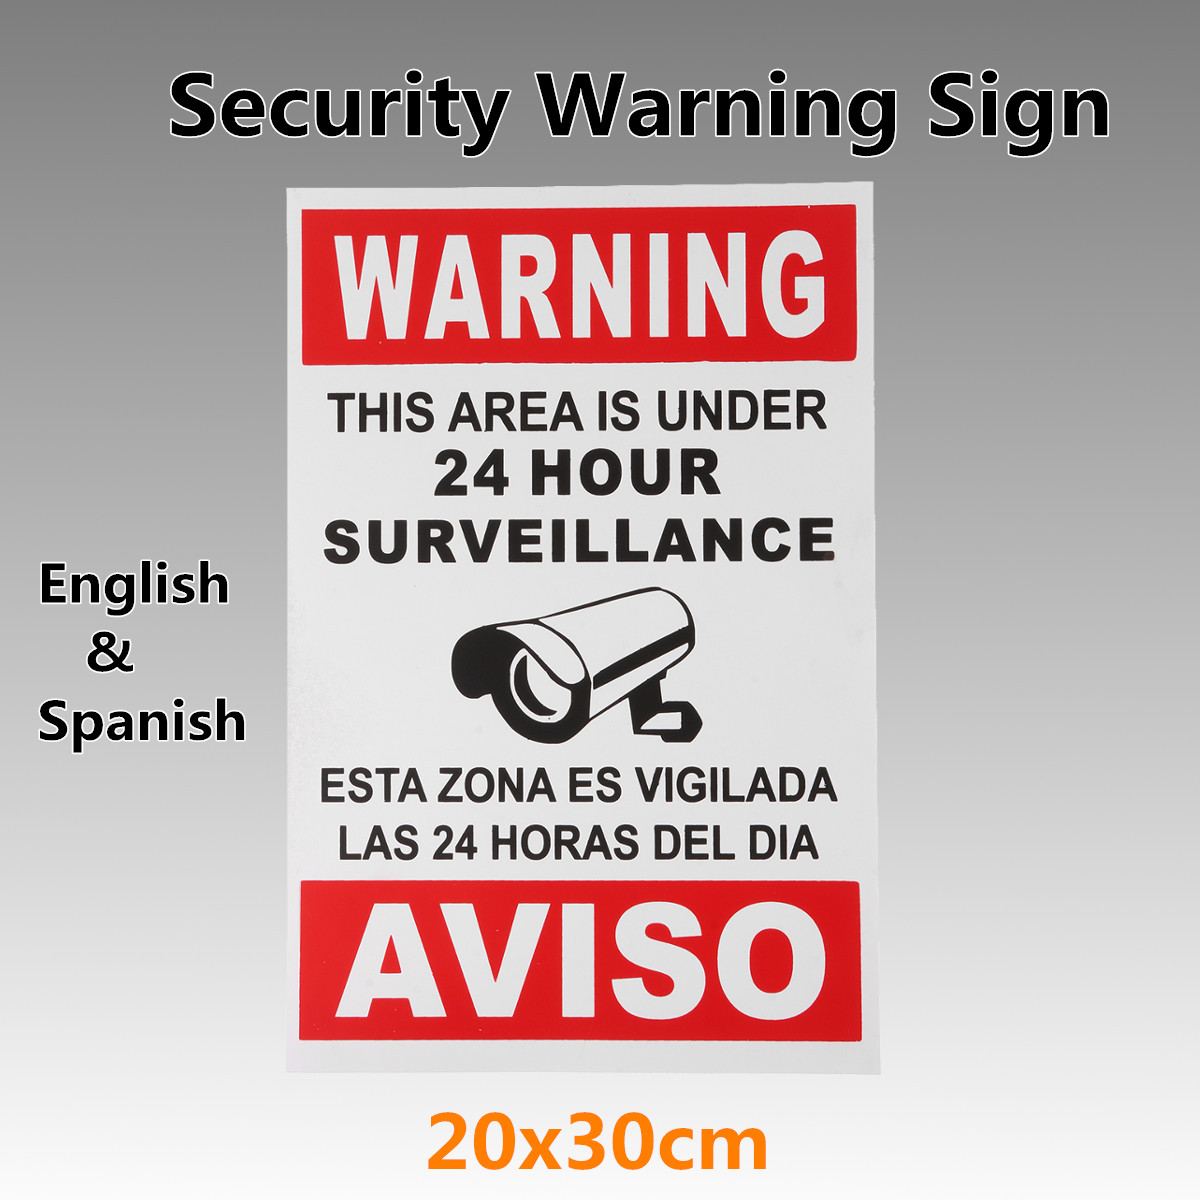 English-Spanish-Security-Warning-Sign-Camera-Sticker-Warning-This-Area-Is-Under-24-Hour-Surveillance-1180753-9